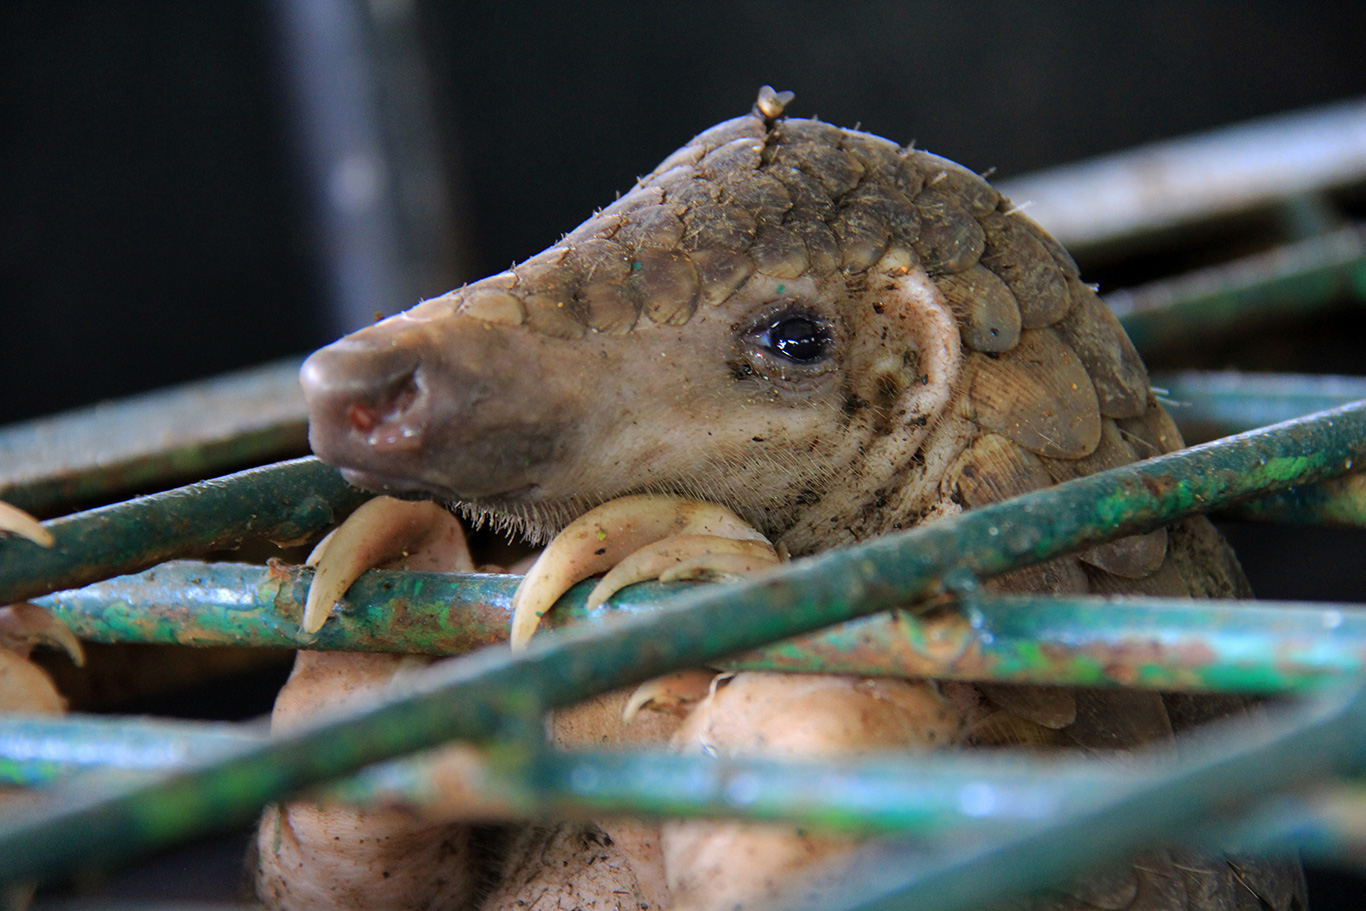 Pangolin purgatory! Chopped, diced and eaten to extinction!